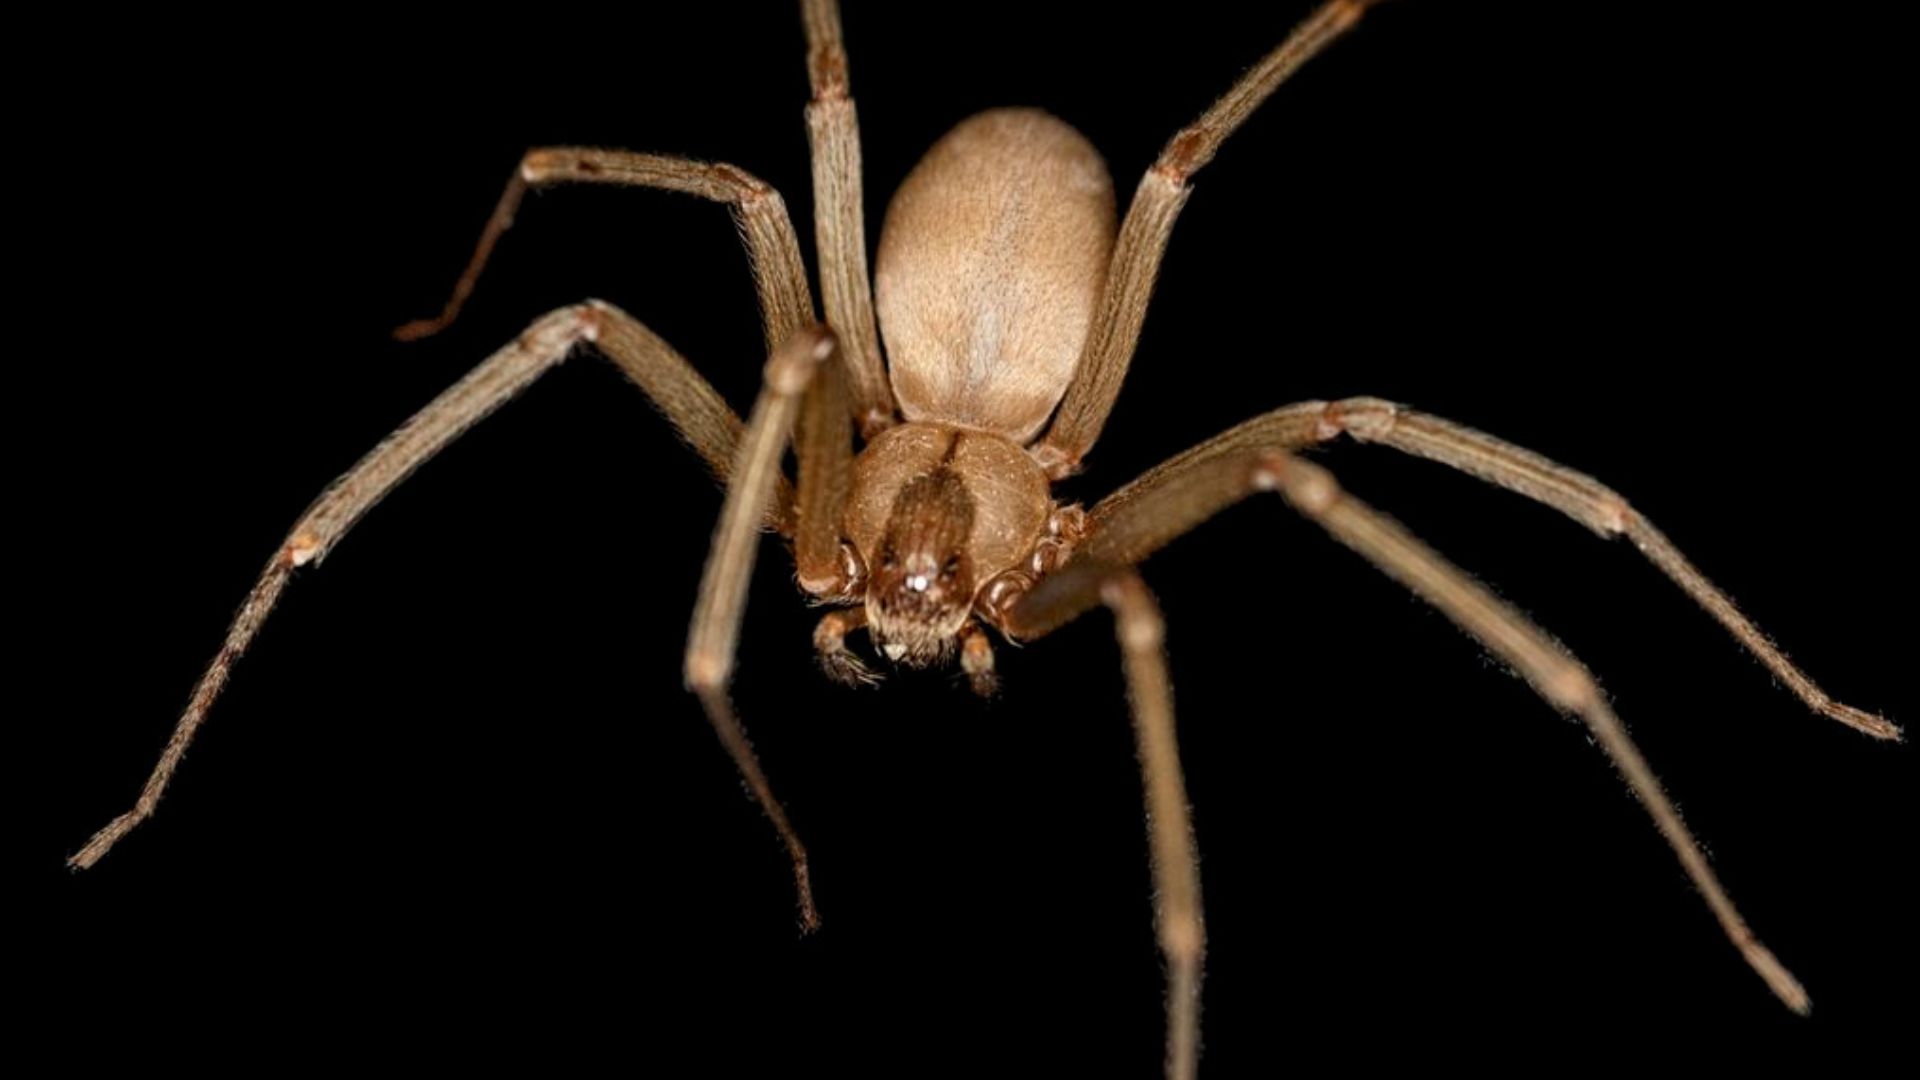 In rare case, man develops painful deep vein blood clots following brown recluse spider bite